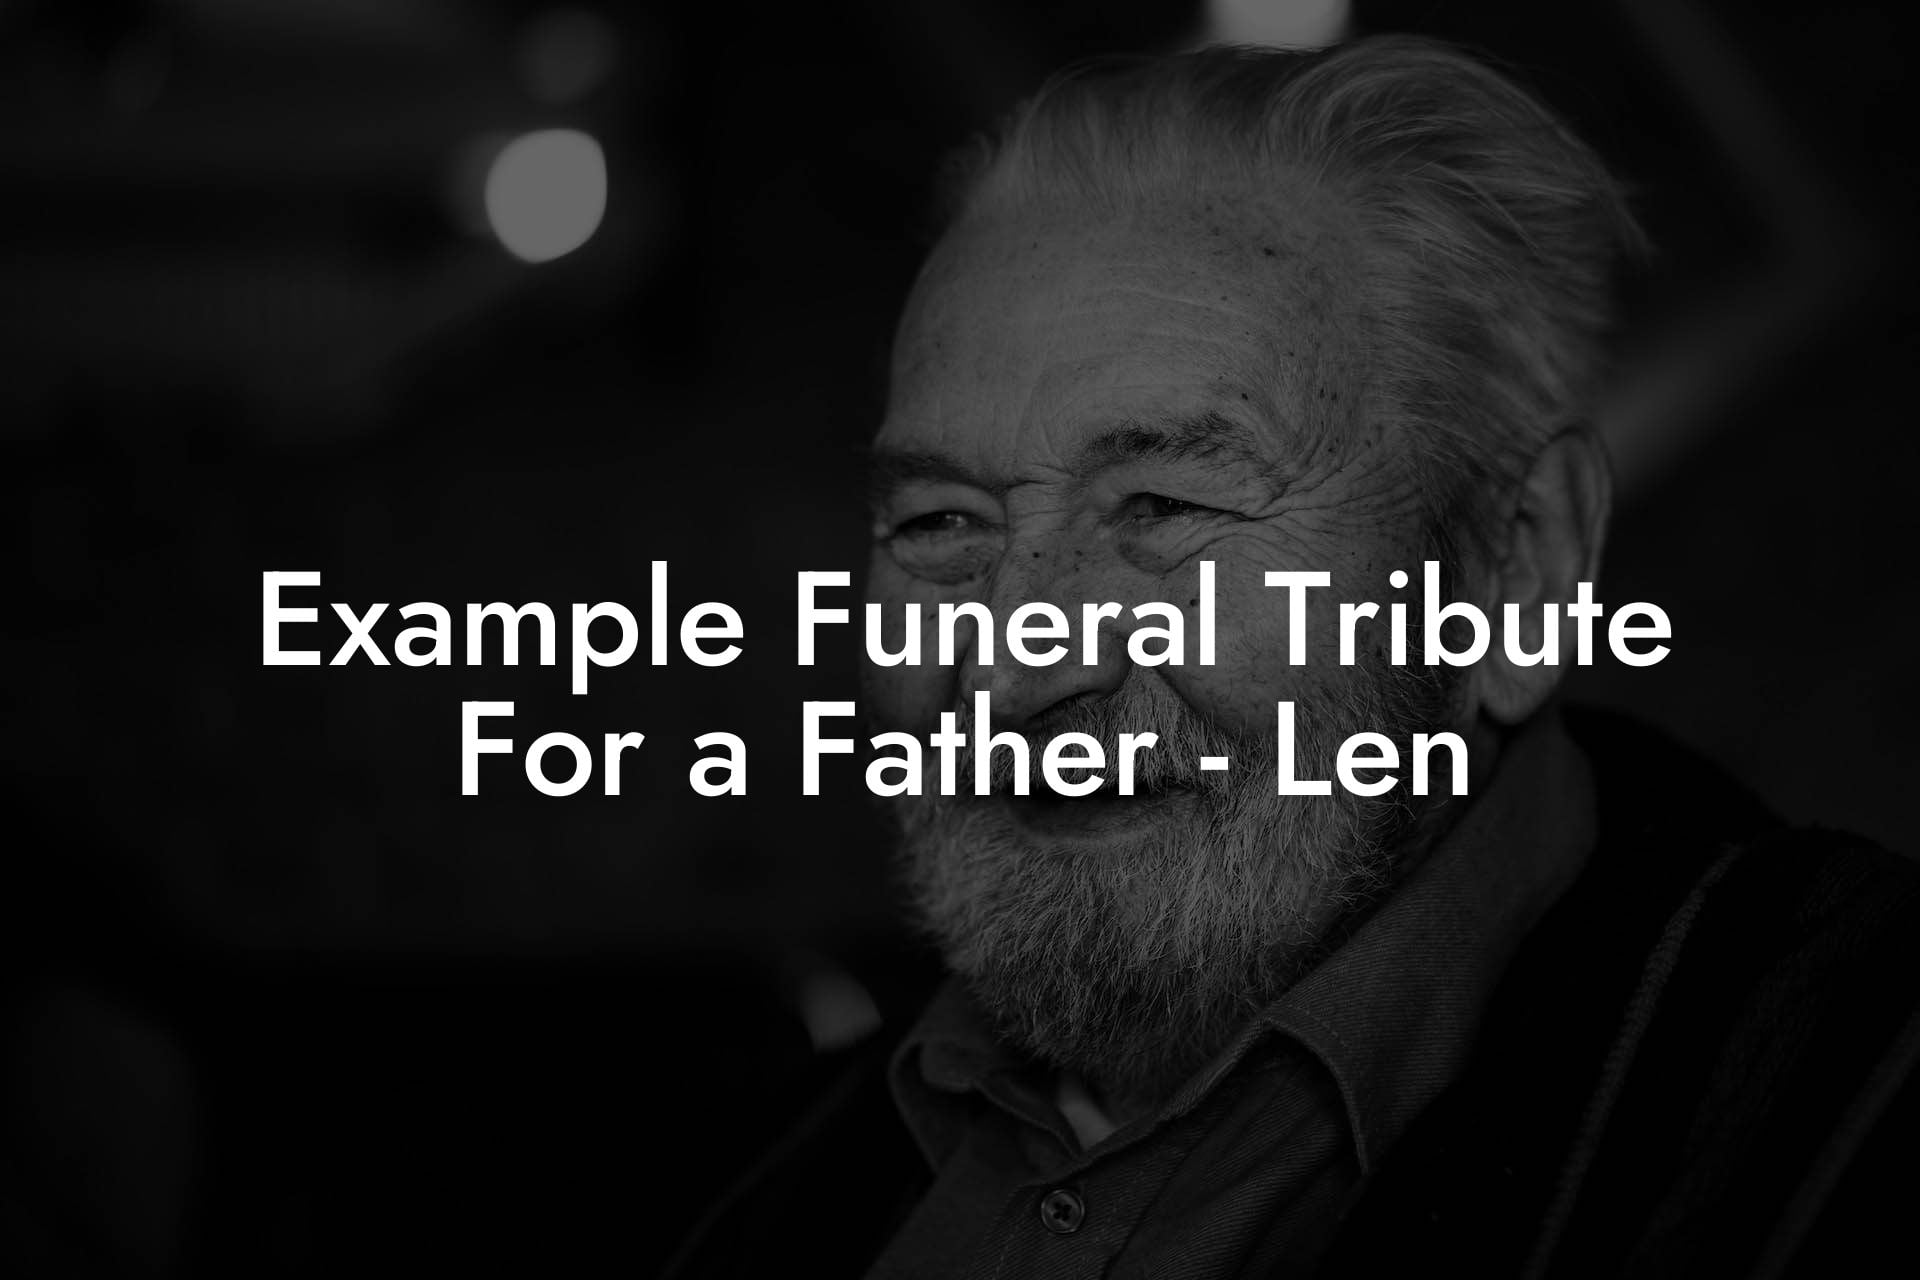 Example Funeral Tribute For a Father - Len